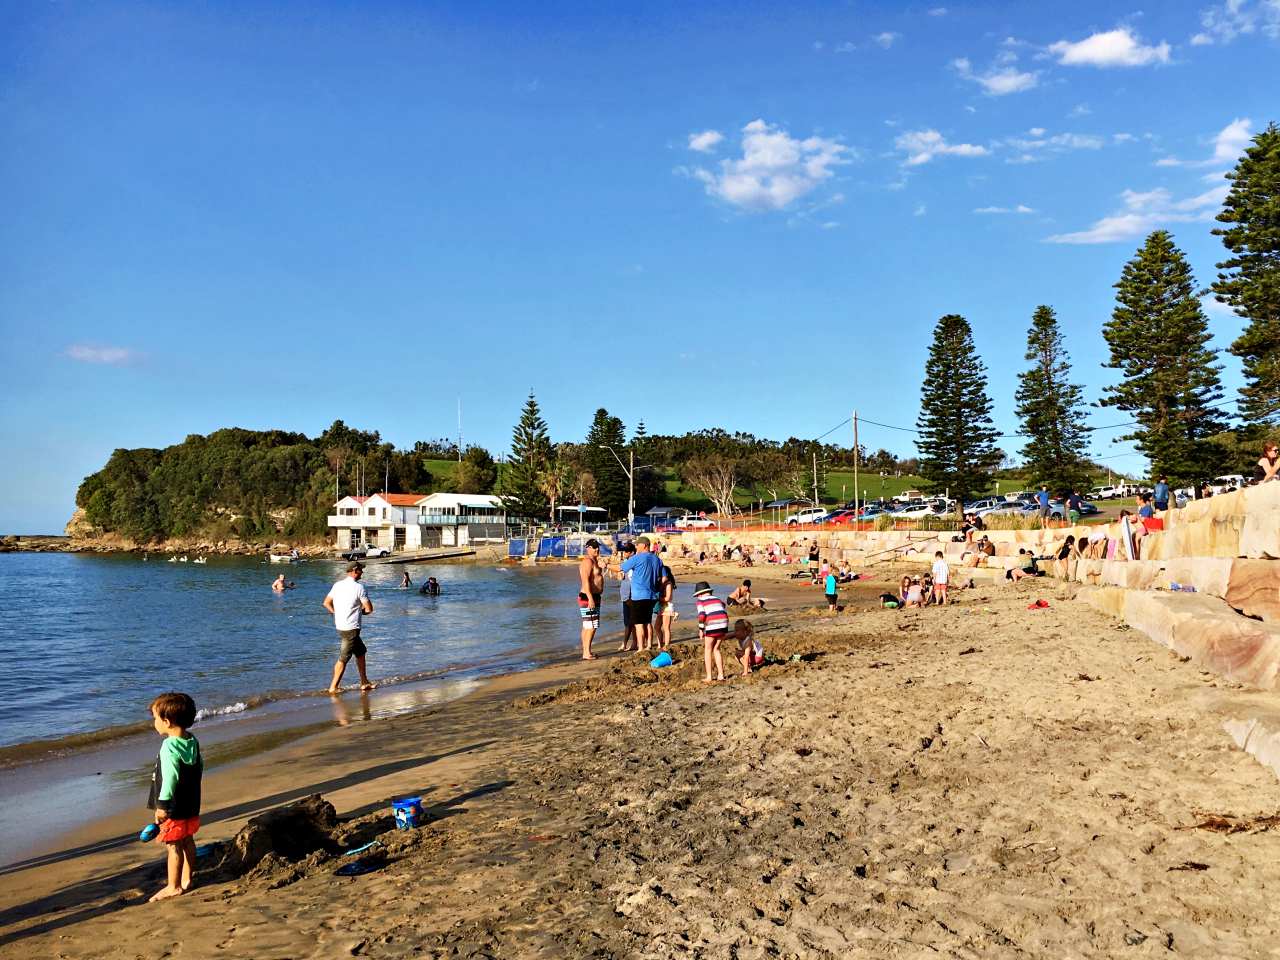 Children dig in the sand at The Haven in Terrigal, NSW - a protected cove surrounded by pine trees, grassed areas perfect for picnics and a boat ramp for fishermen.